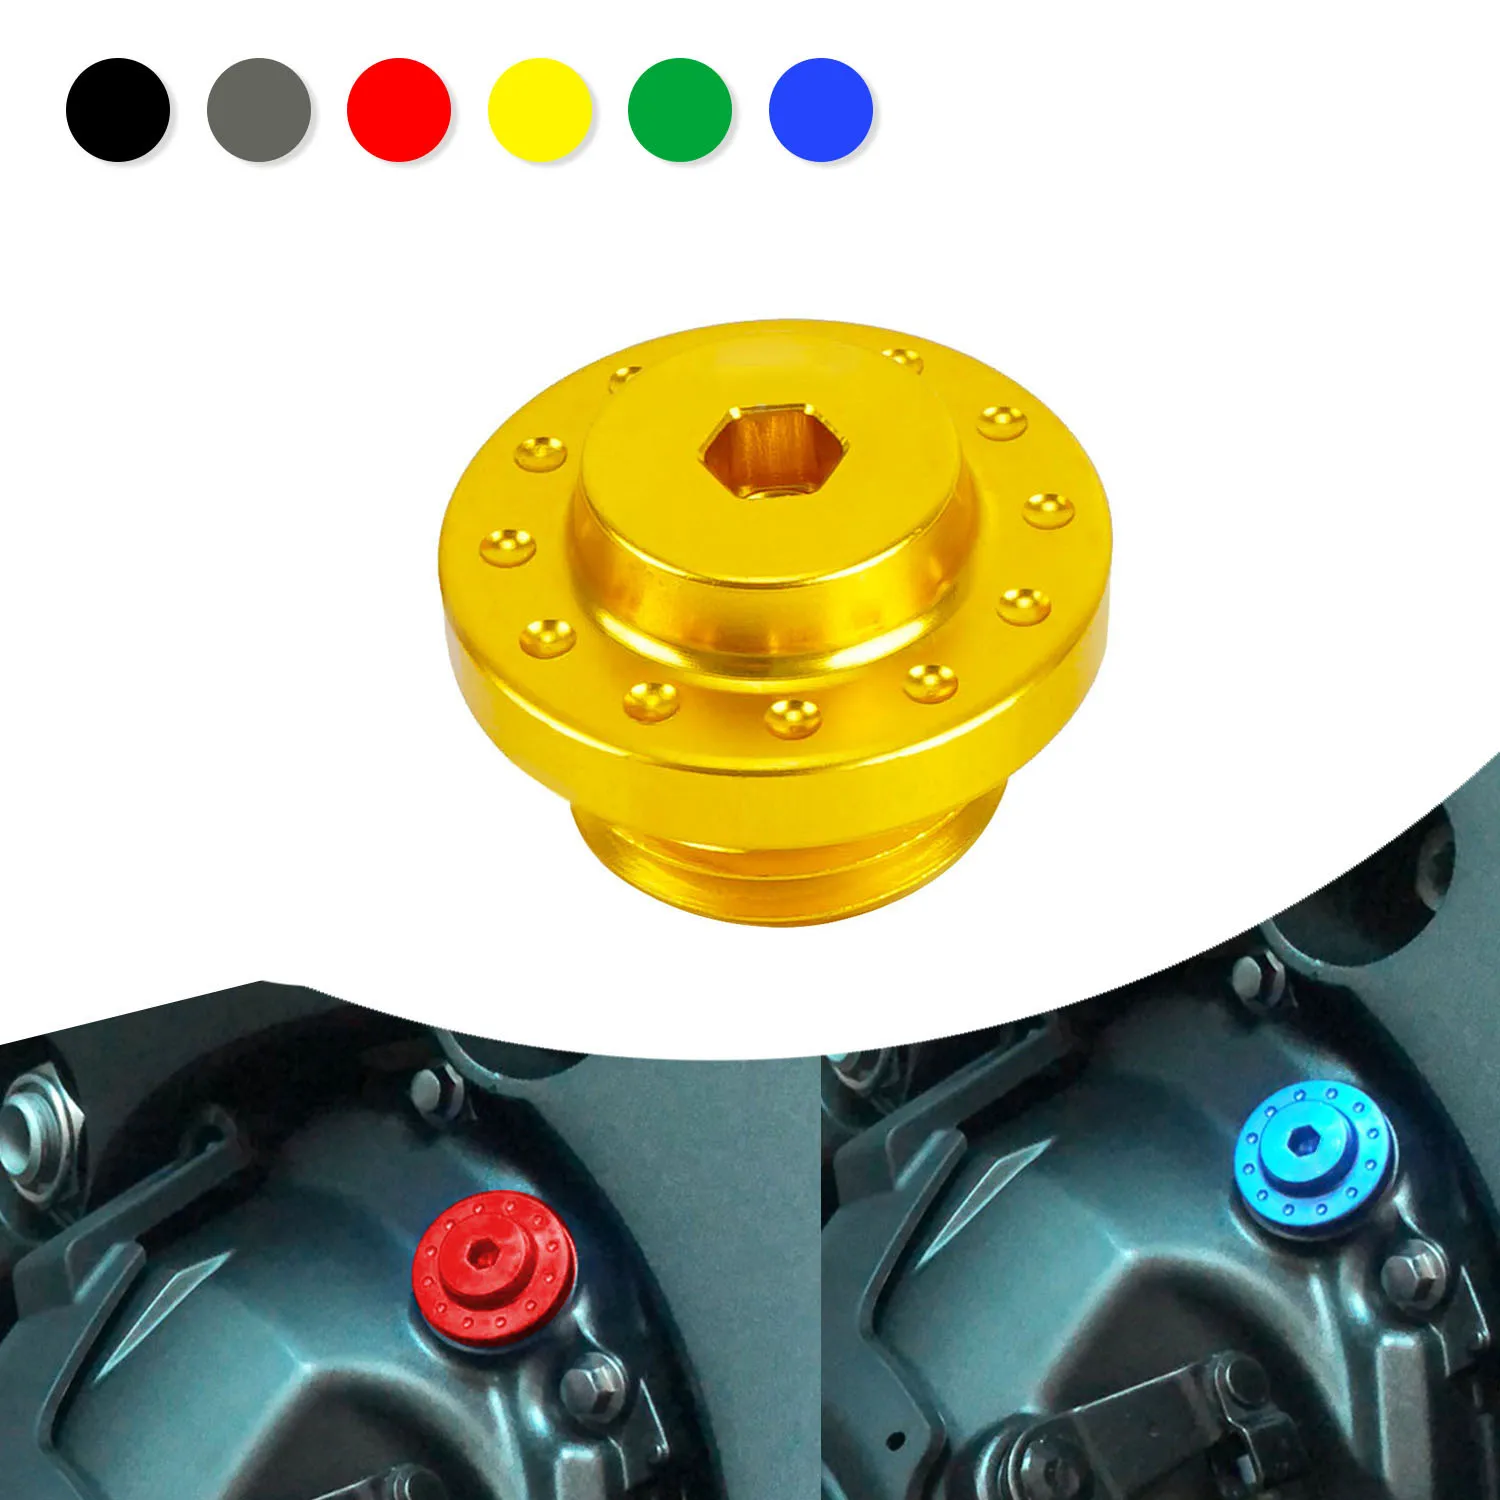 

Motorcycle Accessories Moto Engine Oil Filler Cap Universal M20*2.5 For Ducati Monster 696 796 797 821 937 1100EVO 1200 1200S